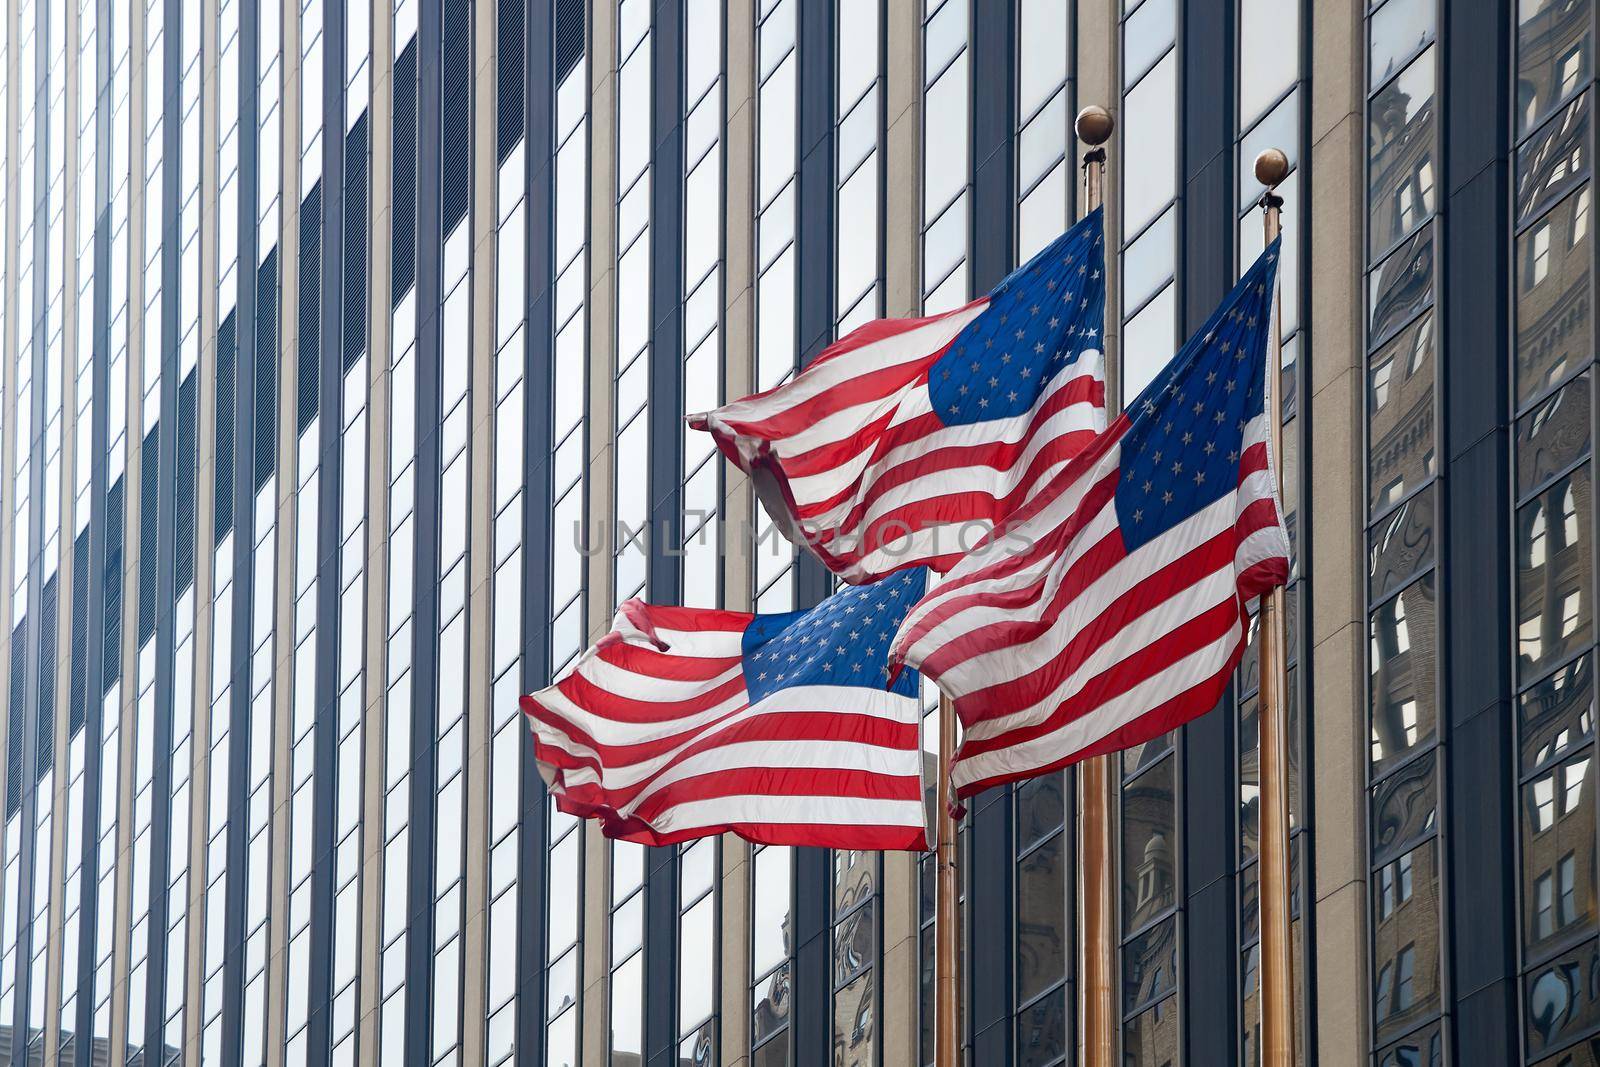 Flags of the United States waving in the wind in New York